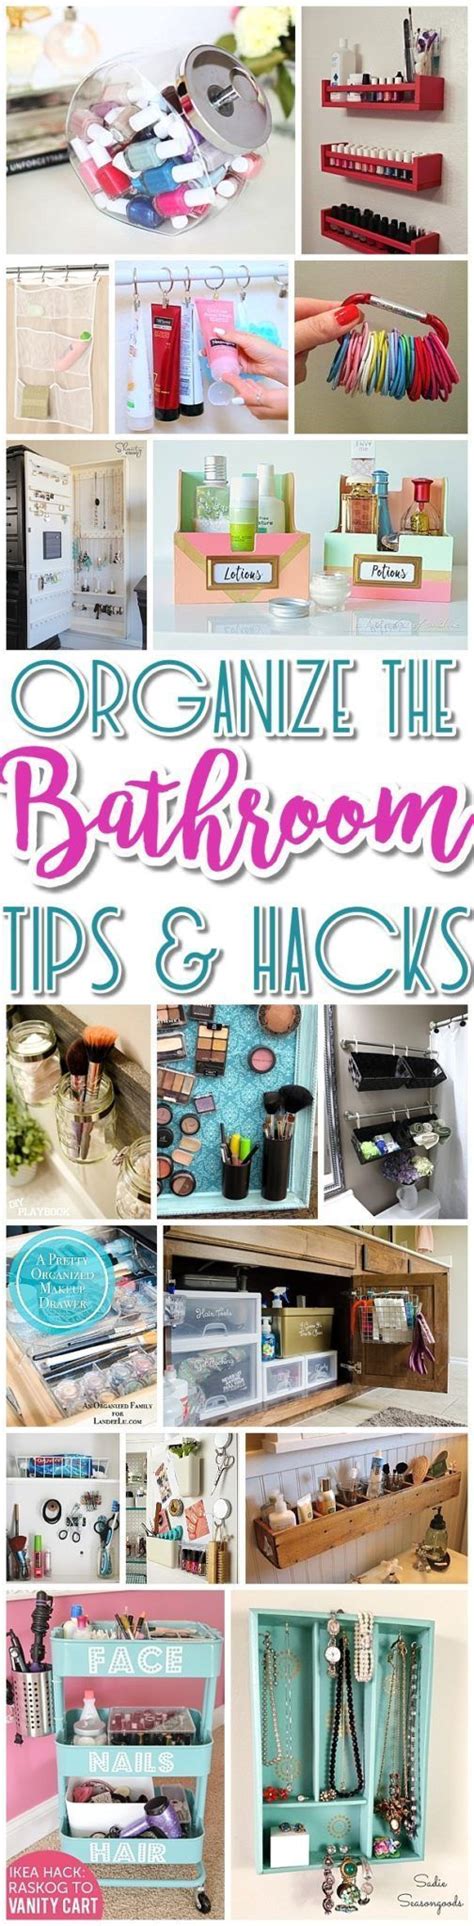 You must leveling a bathroom vanity top before attaching it to the wall. EASY Inexpensive Do it Yourself Ways to Organize and Decorate your Bathroom and Vanity {The BEST ...